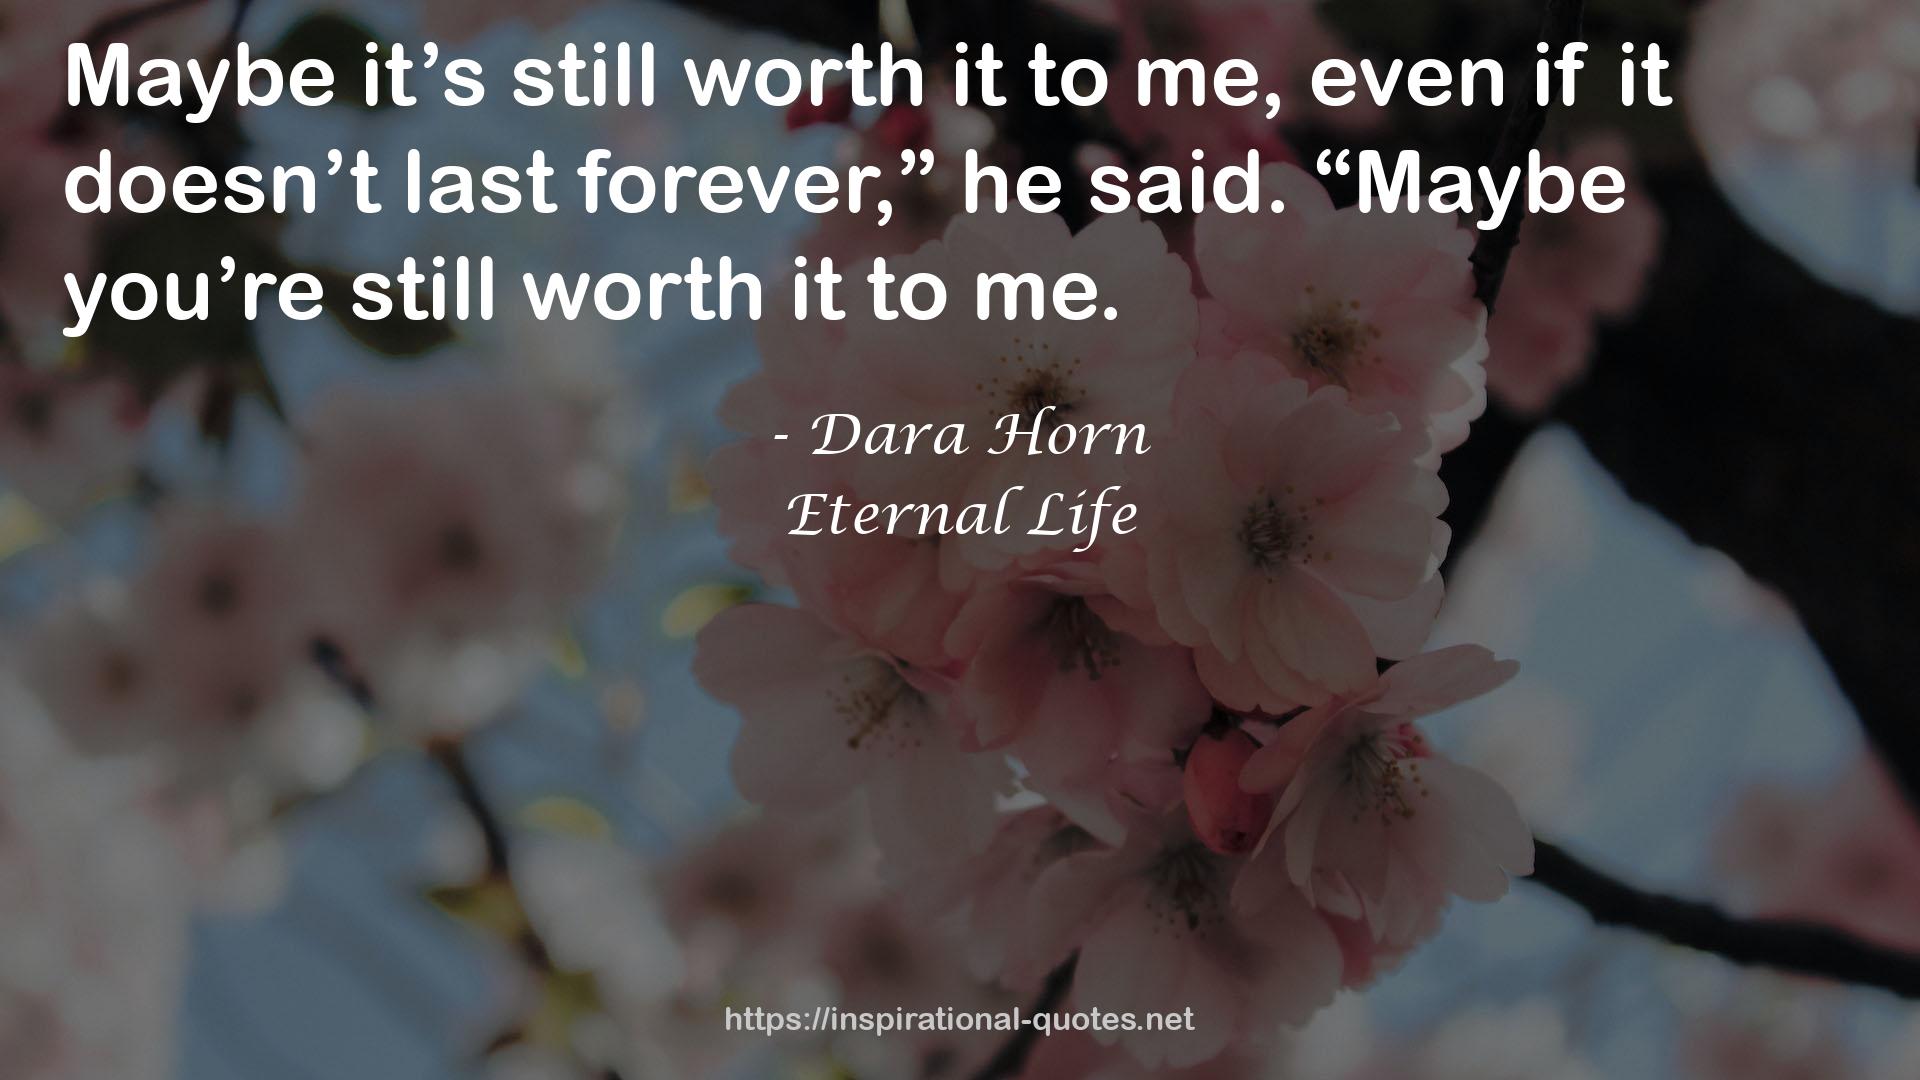 Eternal Life QUOTES